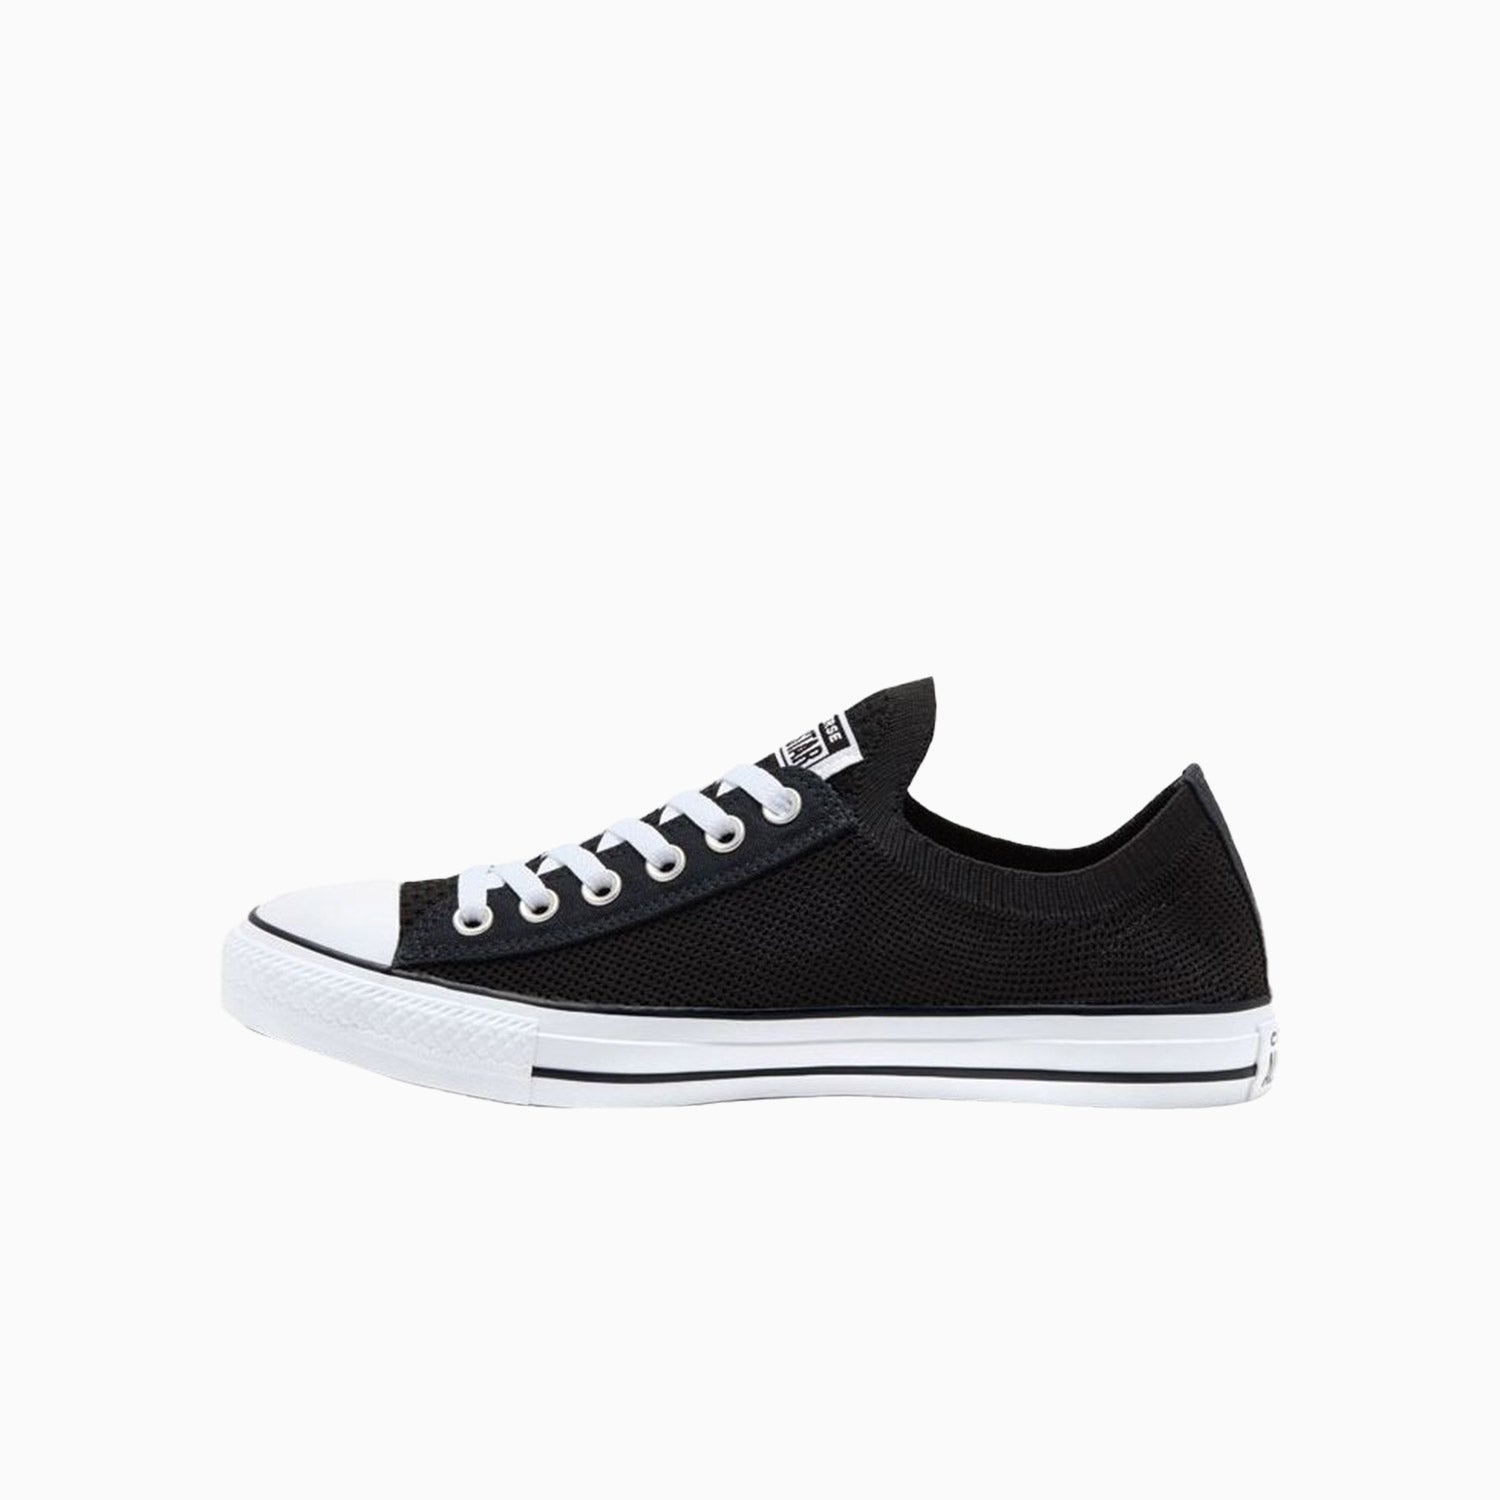 converse-chuck-taylor-all-star-ox-low-knit-shoes-166991f